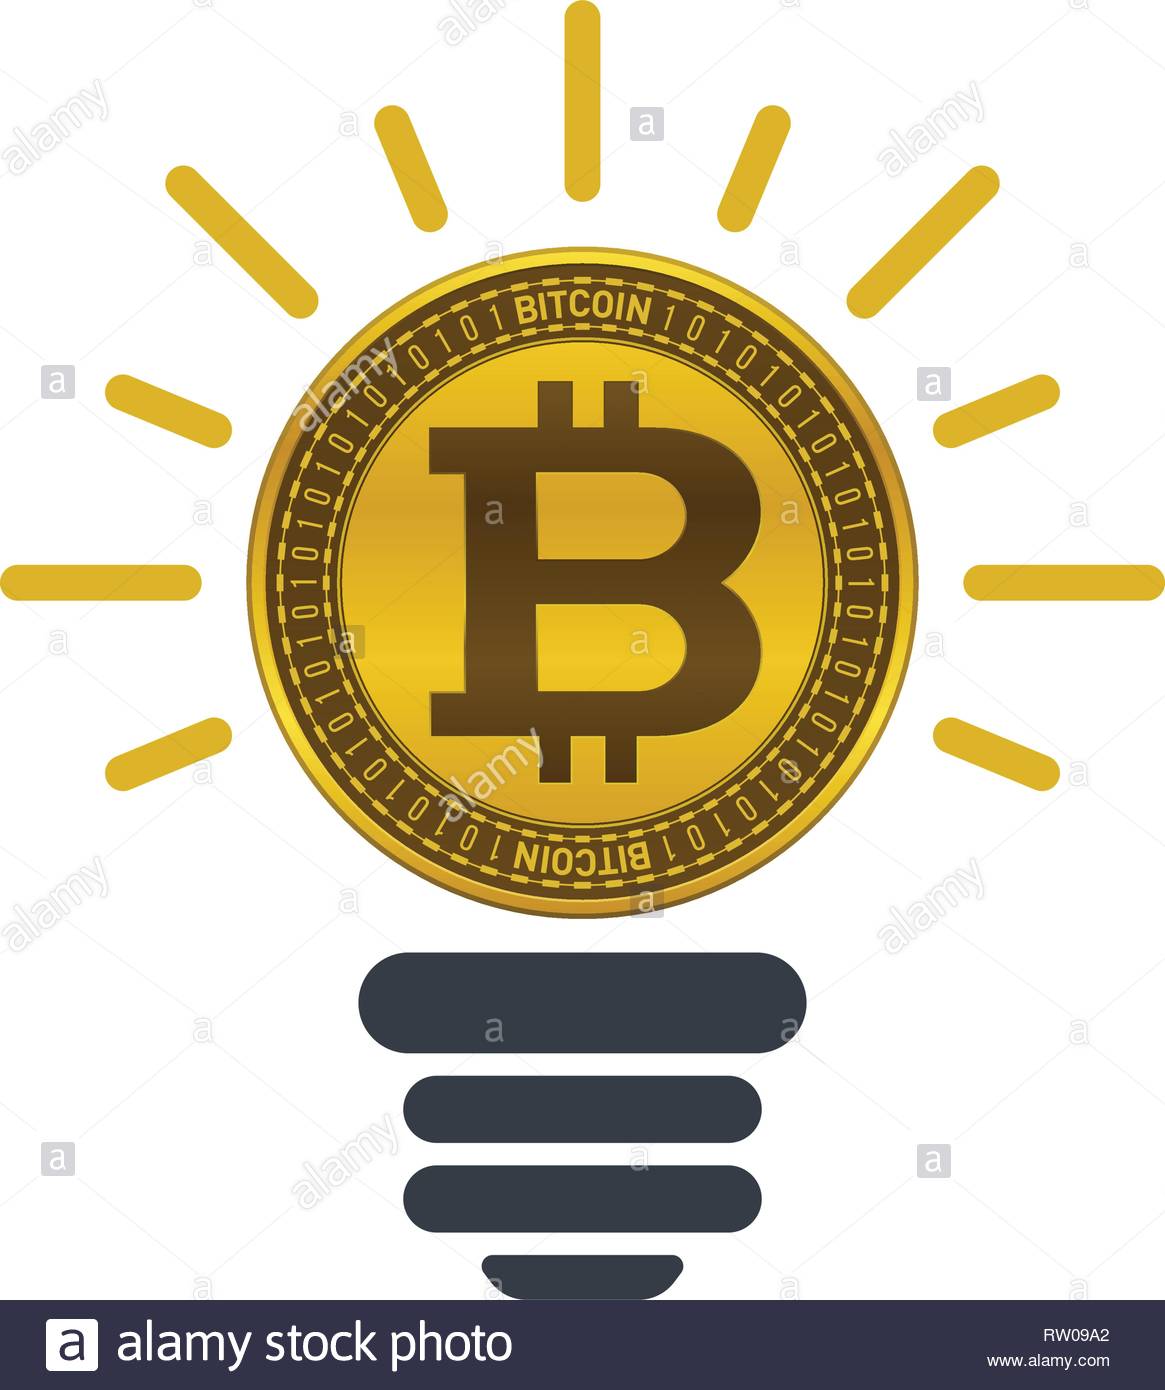 Lamp With Bitcoin On White Background Ideas Of Making Money - 